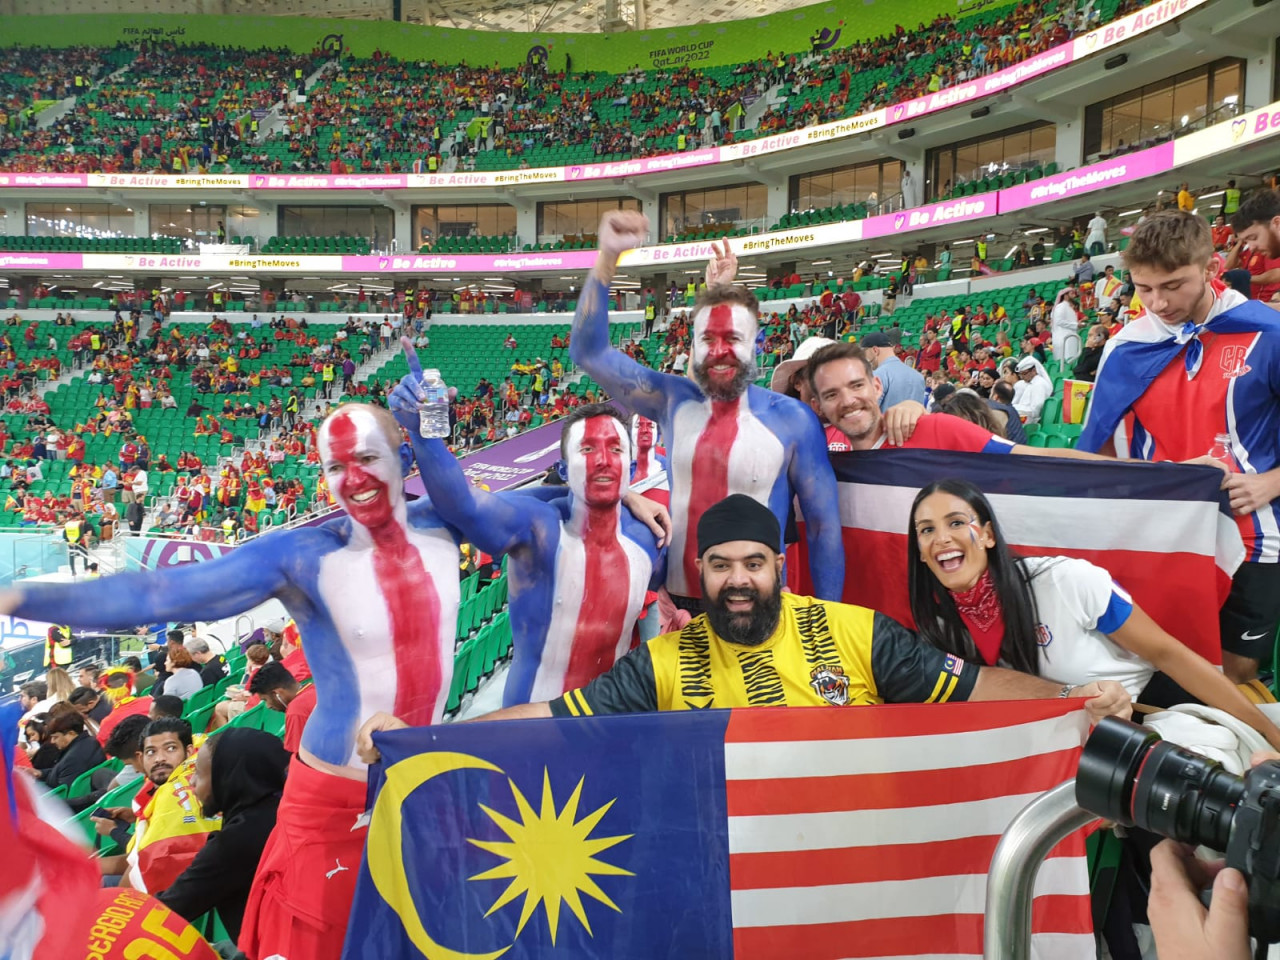 Jagjit poses with the Jalur Gemilang during a World Cup match between Spain and Costa Rica. – Pic courtesy of Jagjit Singh, December 17, 2022